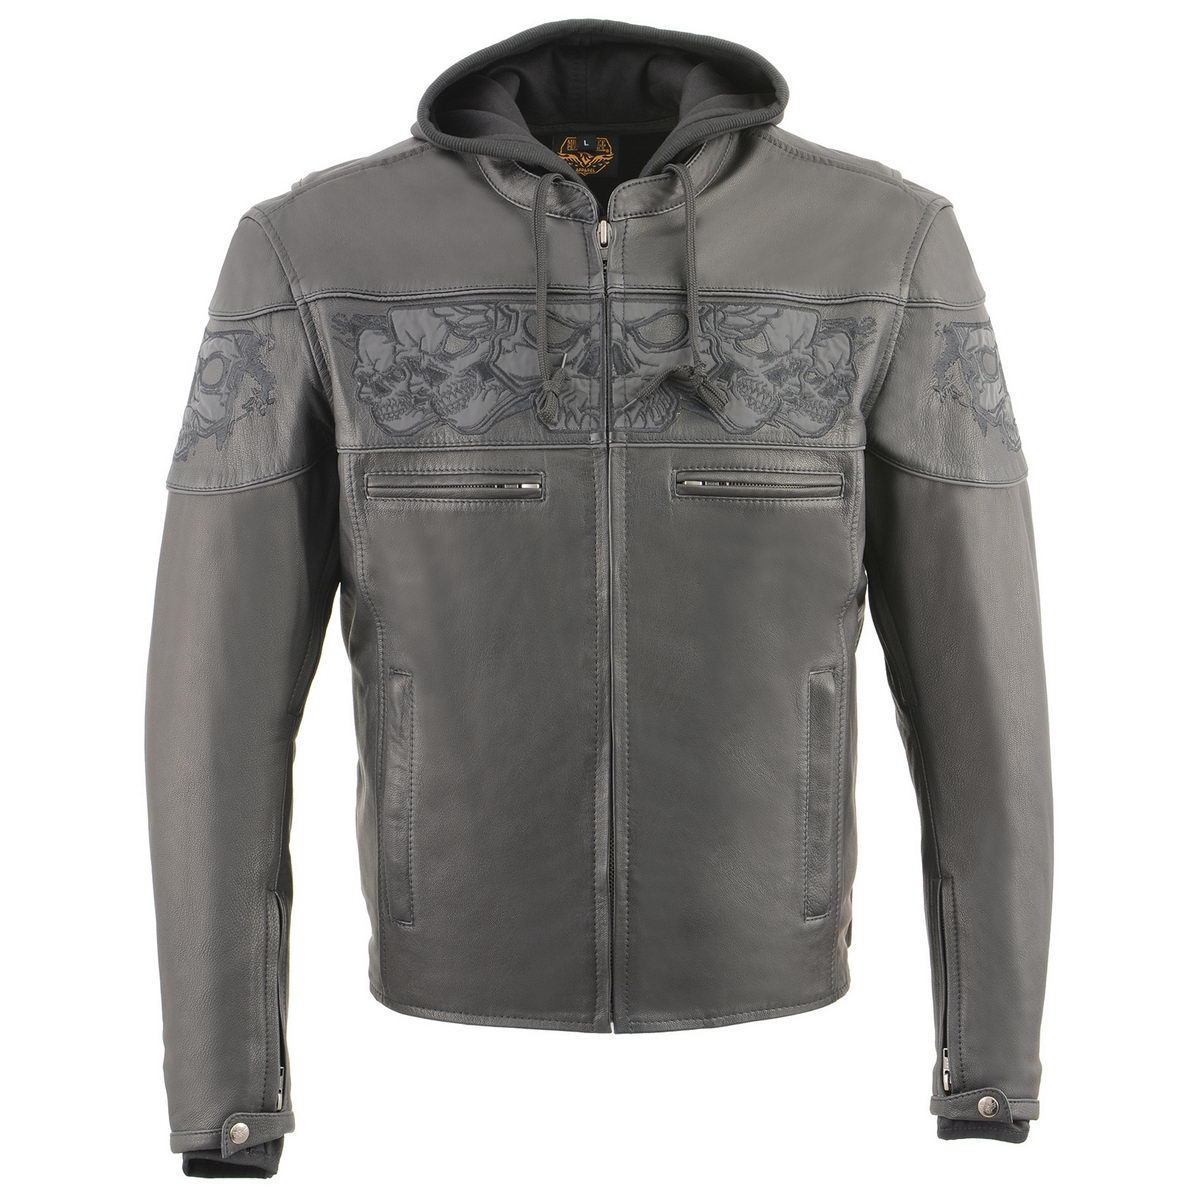 Milwaukee Leather MLM1563 Men's ‘Cross Over’ Black Leather Jacket with Reflective Skulls